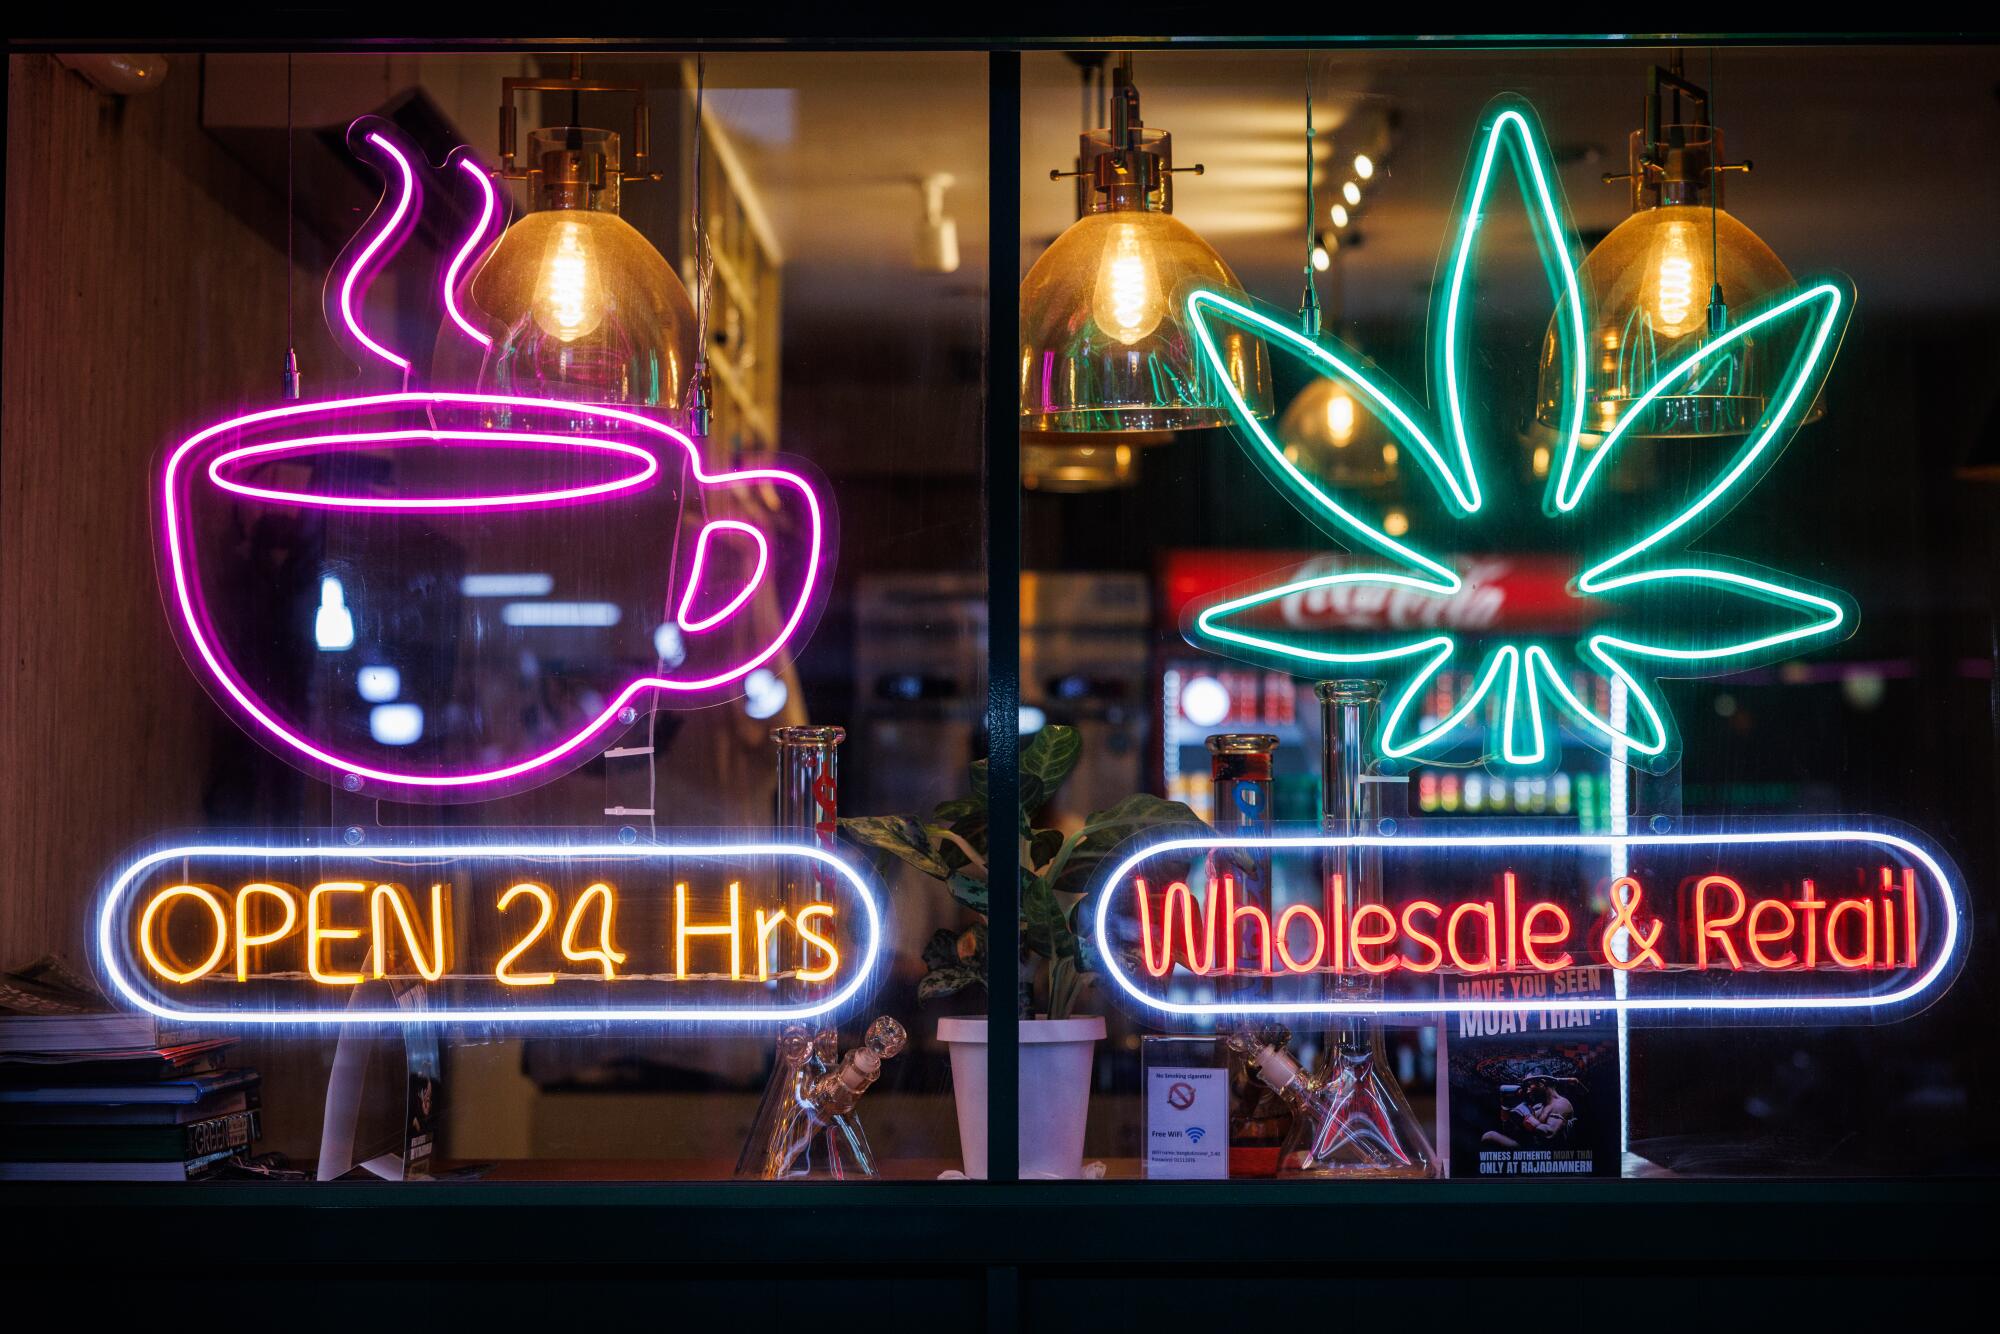 Signs depicting a cup and a marijuana leaf, with the words Open 24 Hrs and Wholesale & Retail